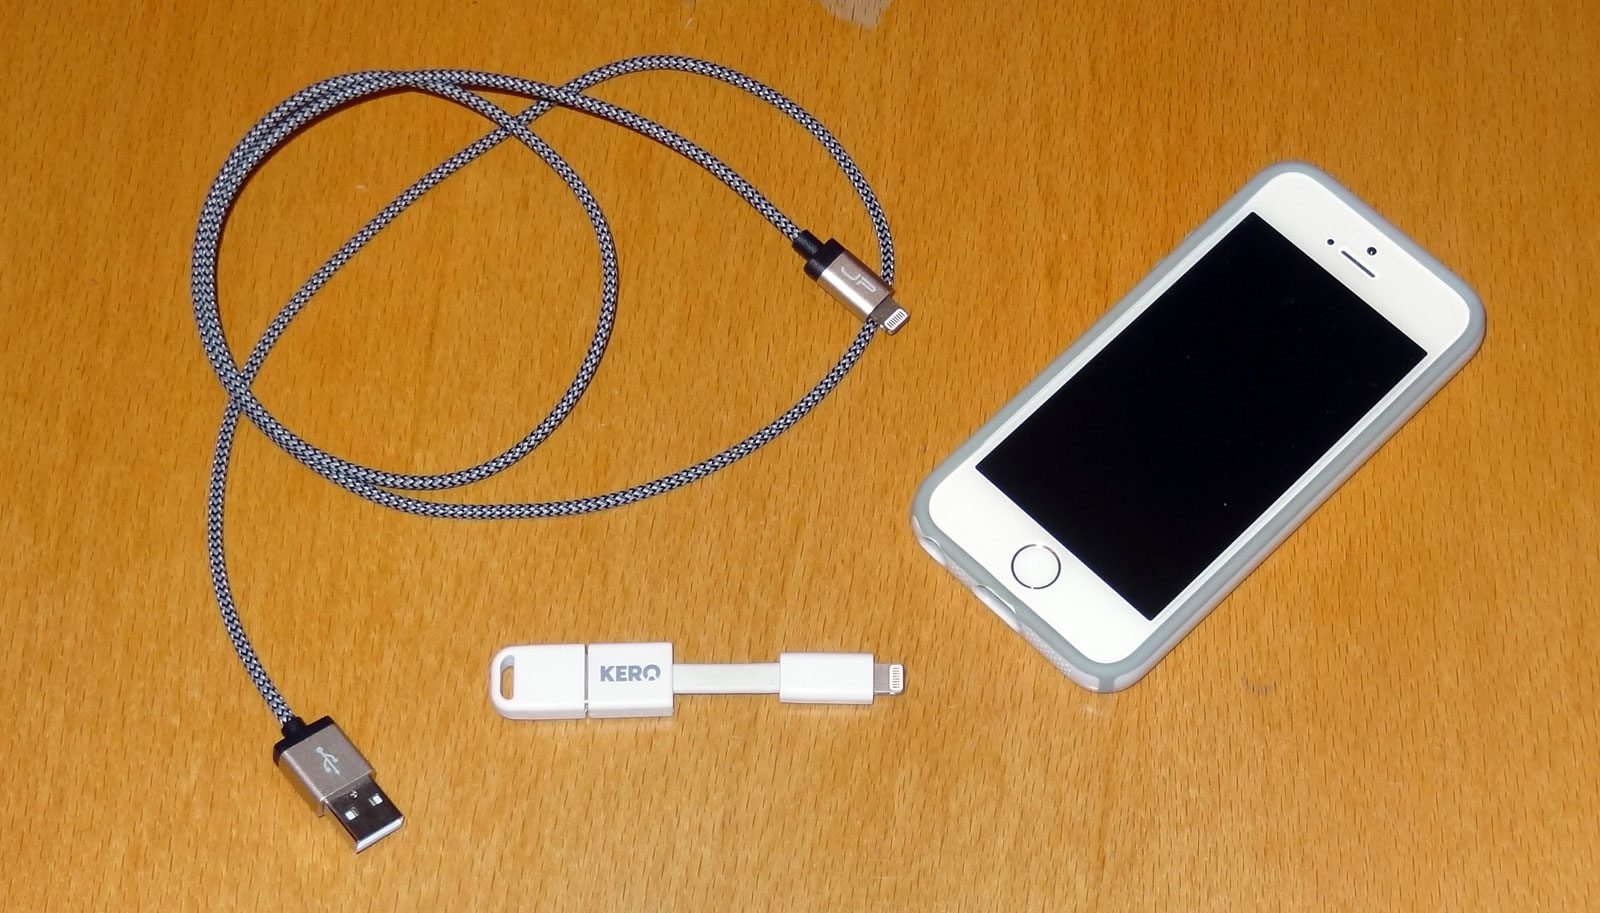 Lightning cables